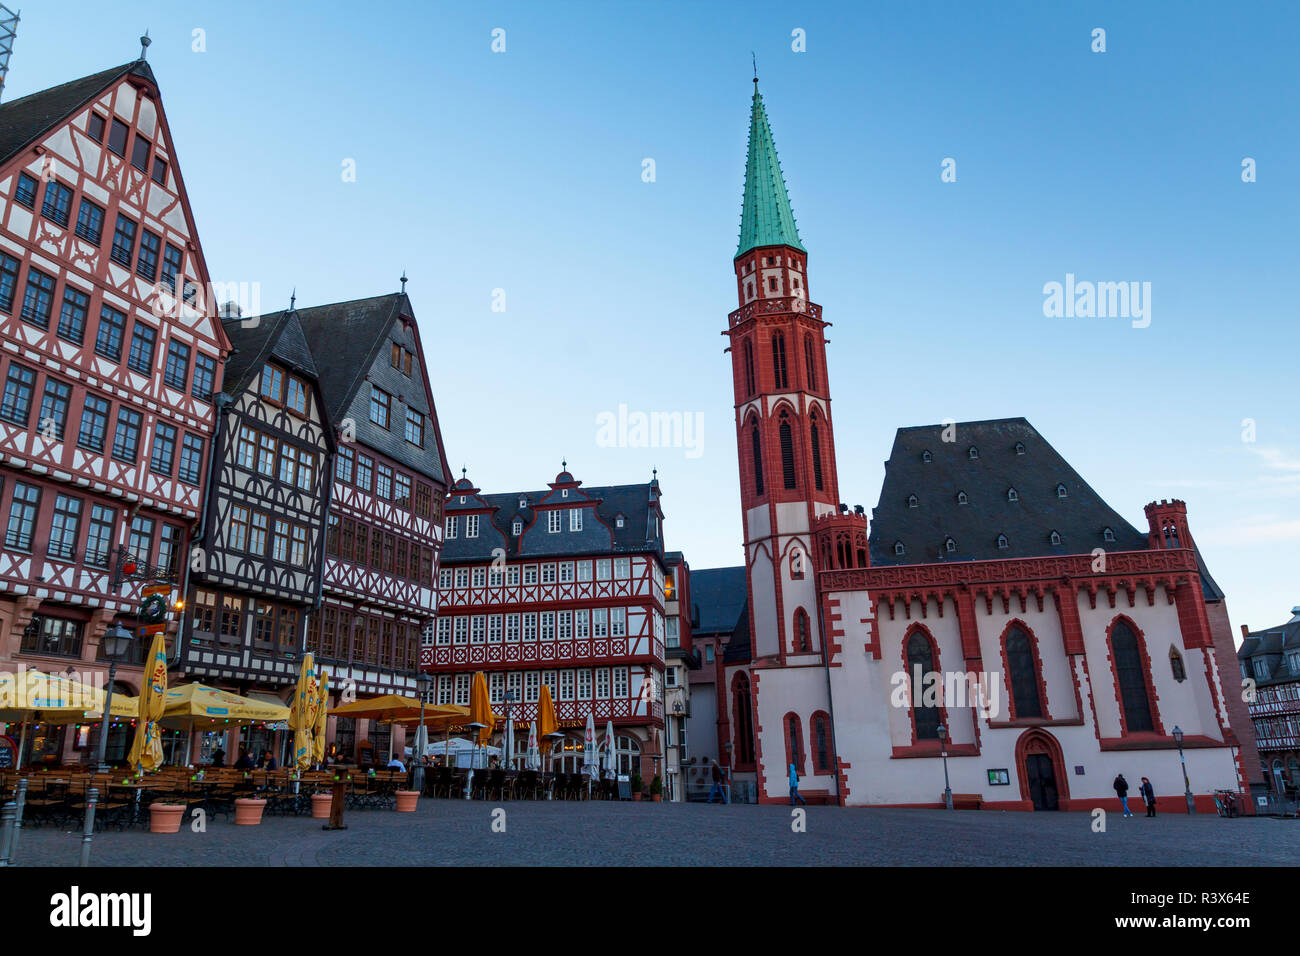 Old Nicholas church and traditional houses in Romer Platz, in the center of Frankfurt, Germany Stock Photo